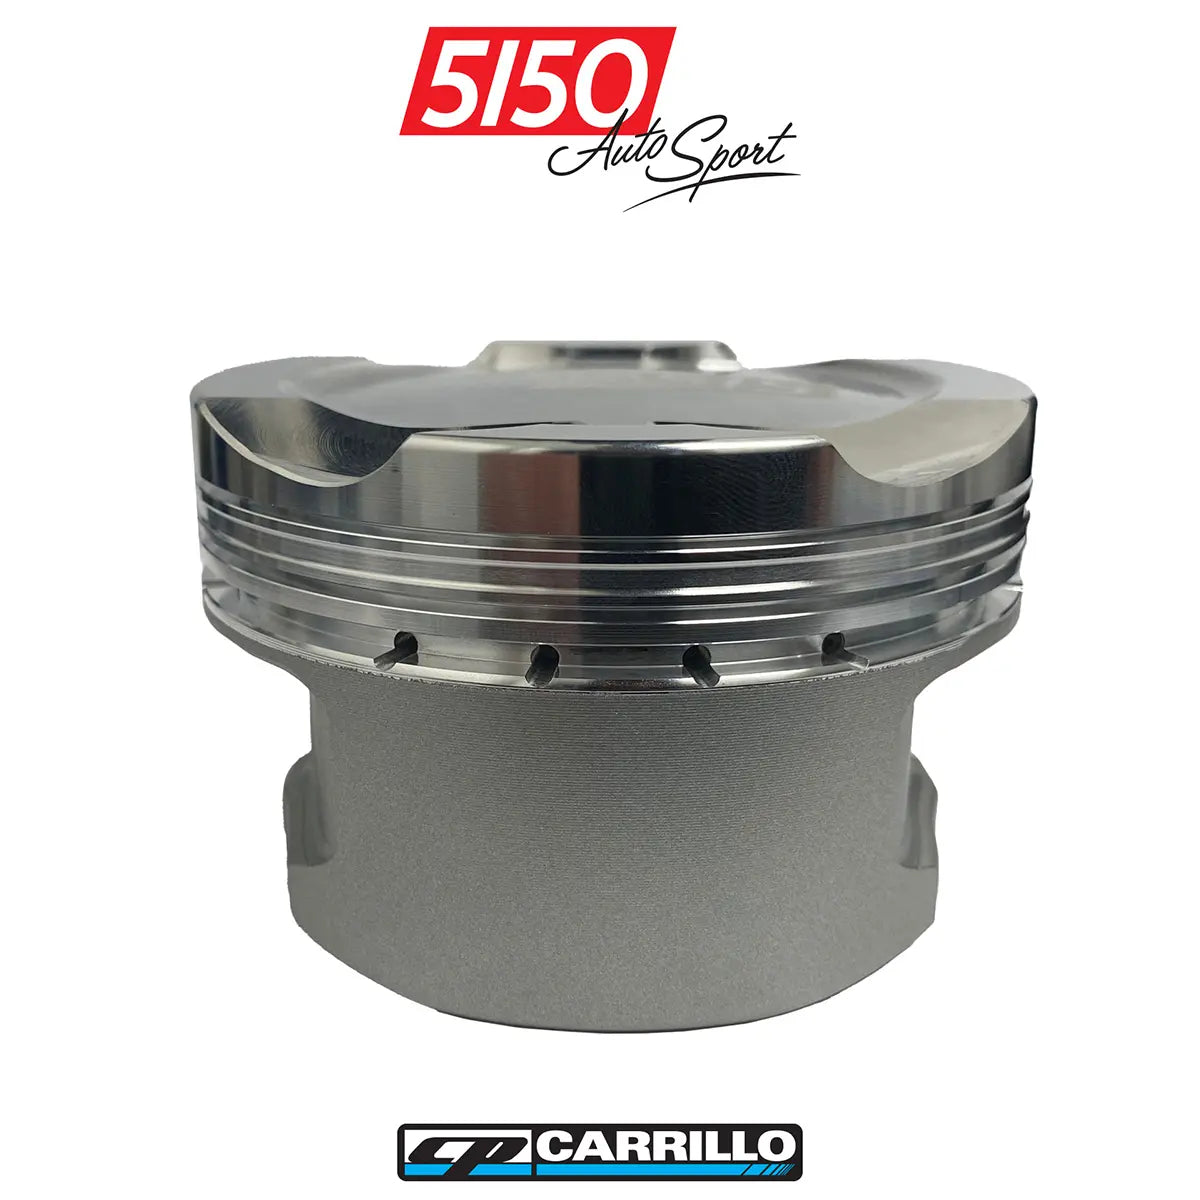 BMW N63 Piston Featuring Specialized Skirt Coating for Alusil Bores